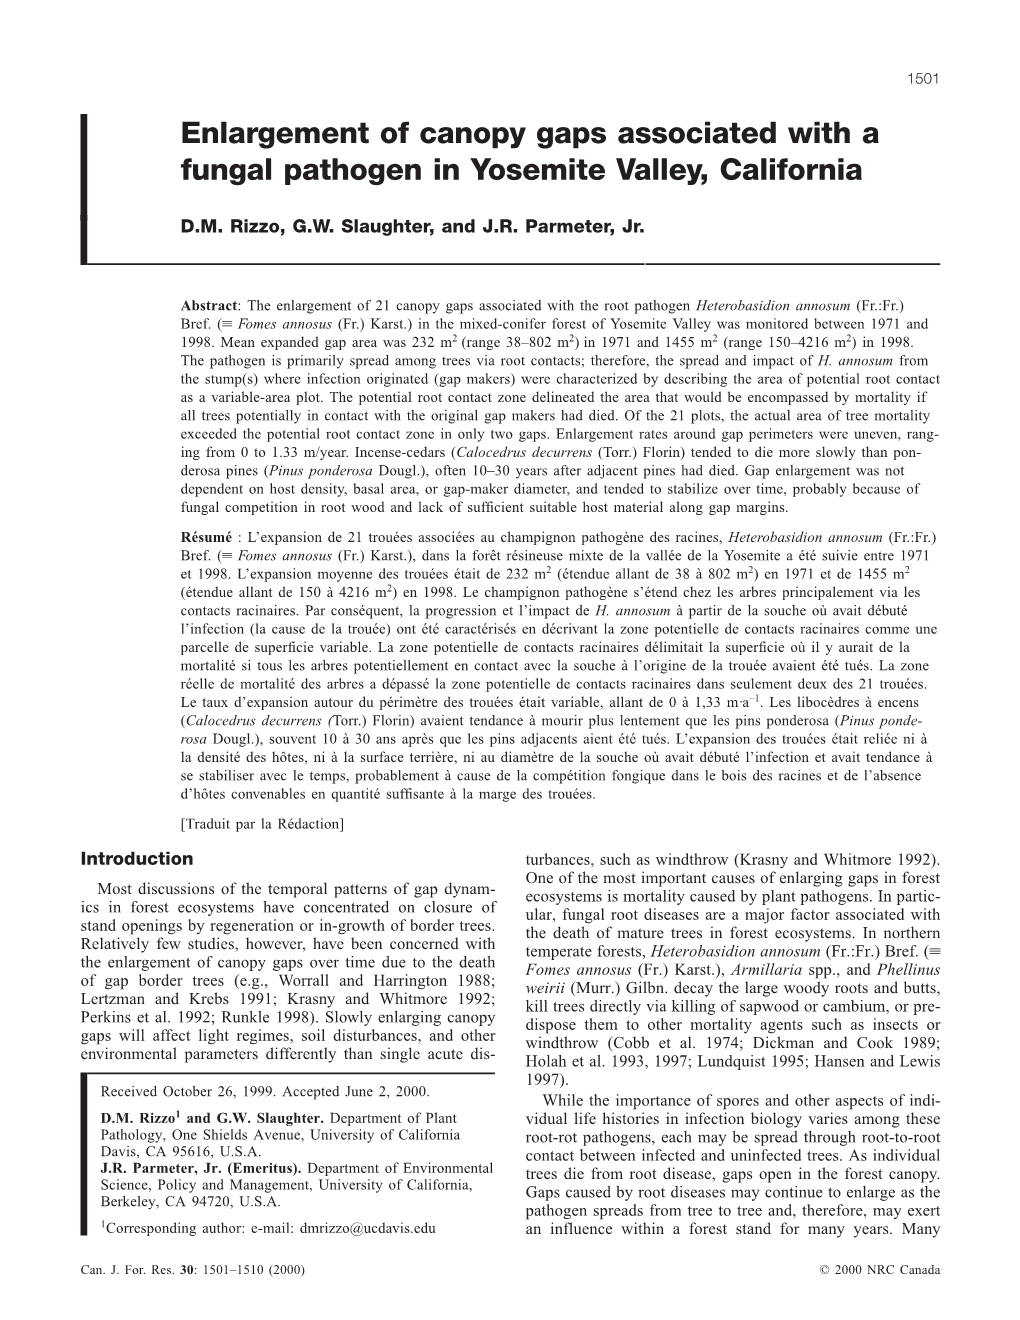 Enlargement of Canopy Gaps Associated with a Fungal Pathogen in Yosemite Valley, California